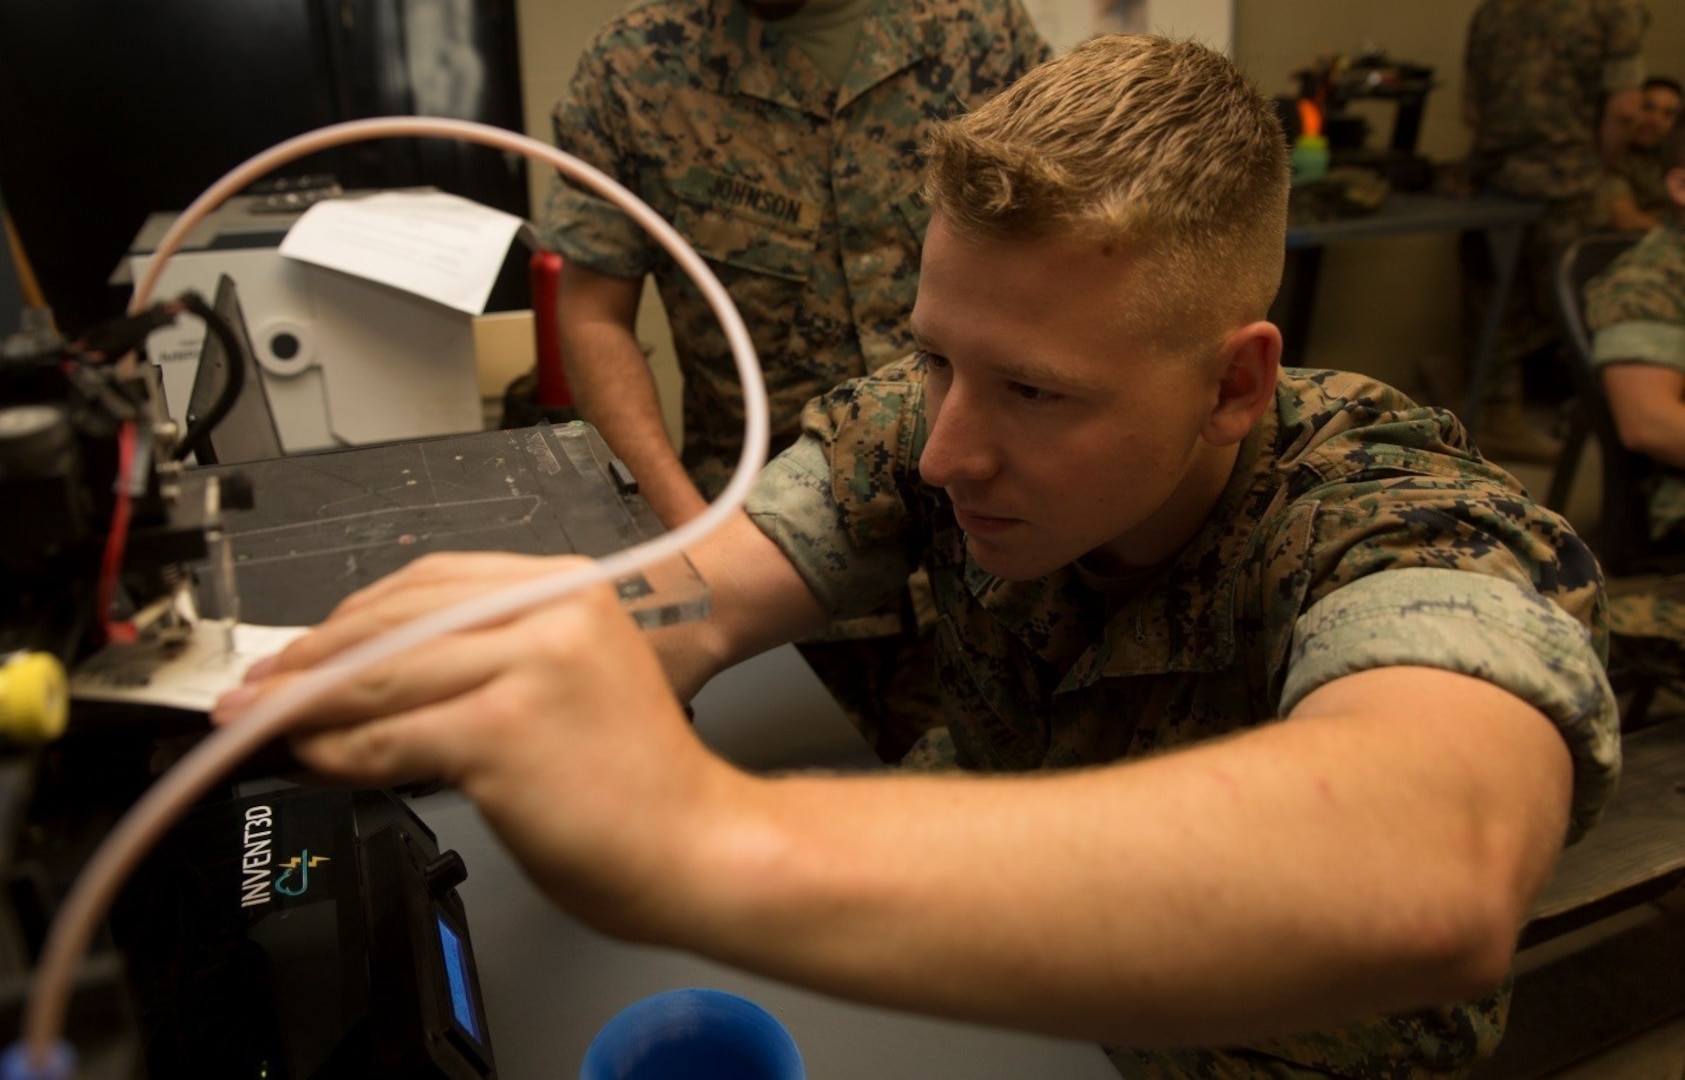 A Marine calibrates a three-dimensional printer during the 3-D Printing Training Course at Marine Corps Base Camp Lejeune, North Carolina. Marines have been embracing 3-D printing for several years now, and there are more than 40 units using 3-D printers in the field to build drones, buildings, vehicles and other items out of various materials. (U.S. Marine Corps photo by Sgt. Ian Leones) [High-resolution photo]